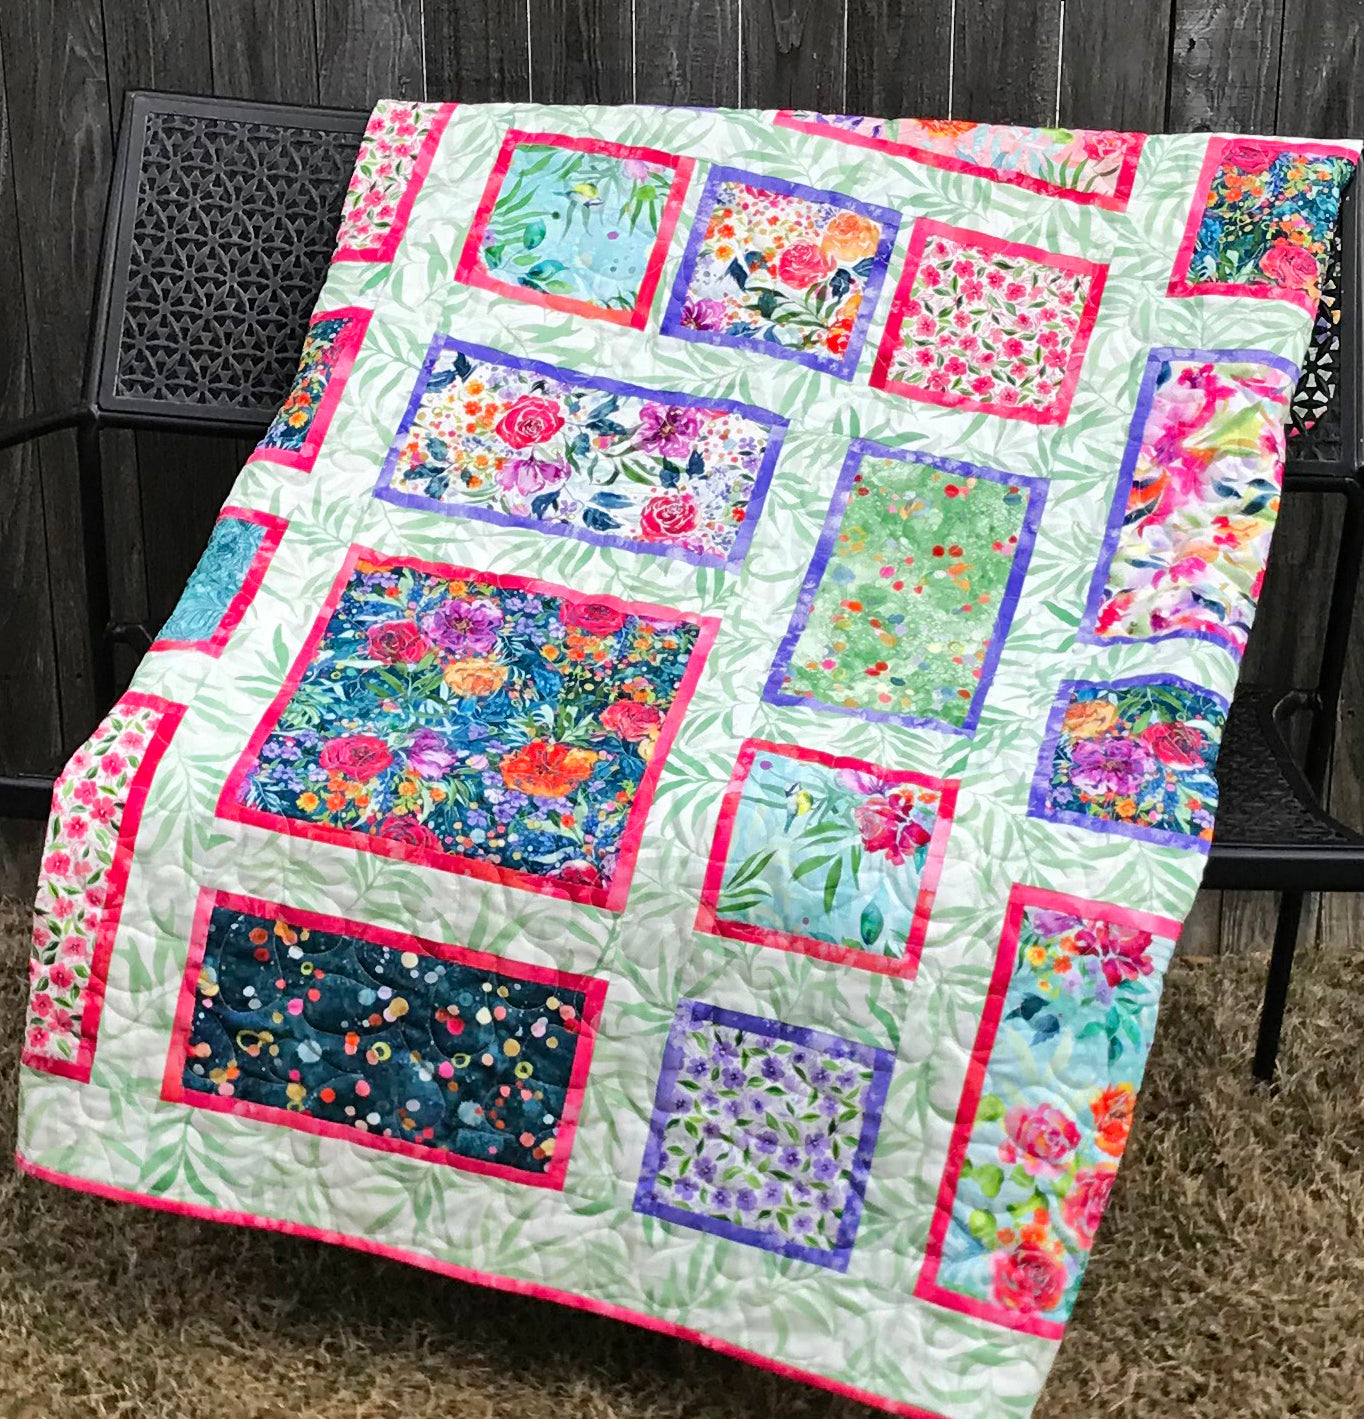 Fancy Frames Quilt pattern of watercolor floral squares and rectangles framed with pink and purple fabric on a light green background. Quilt is shown folded on a bench.